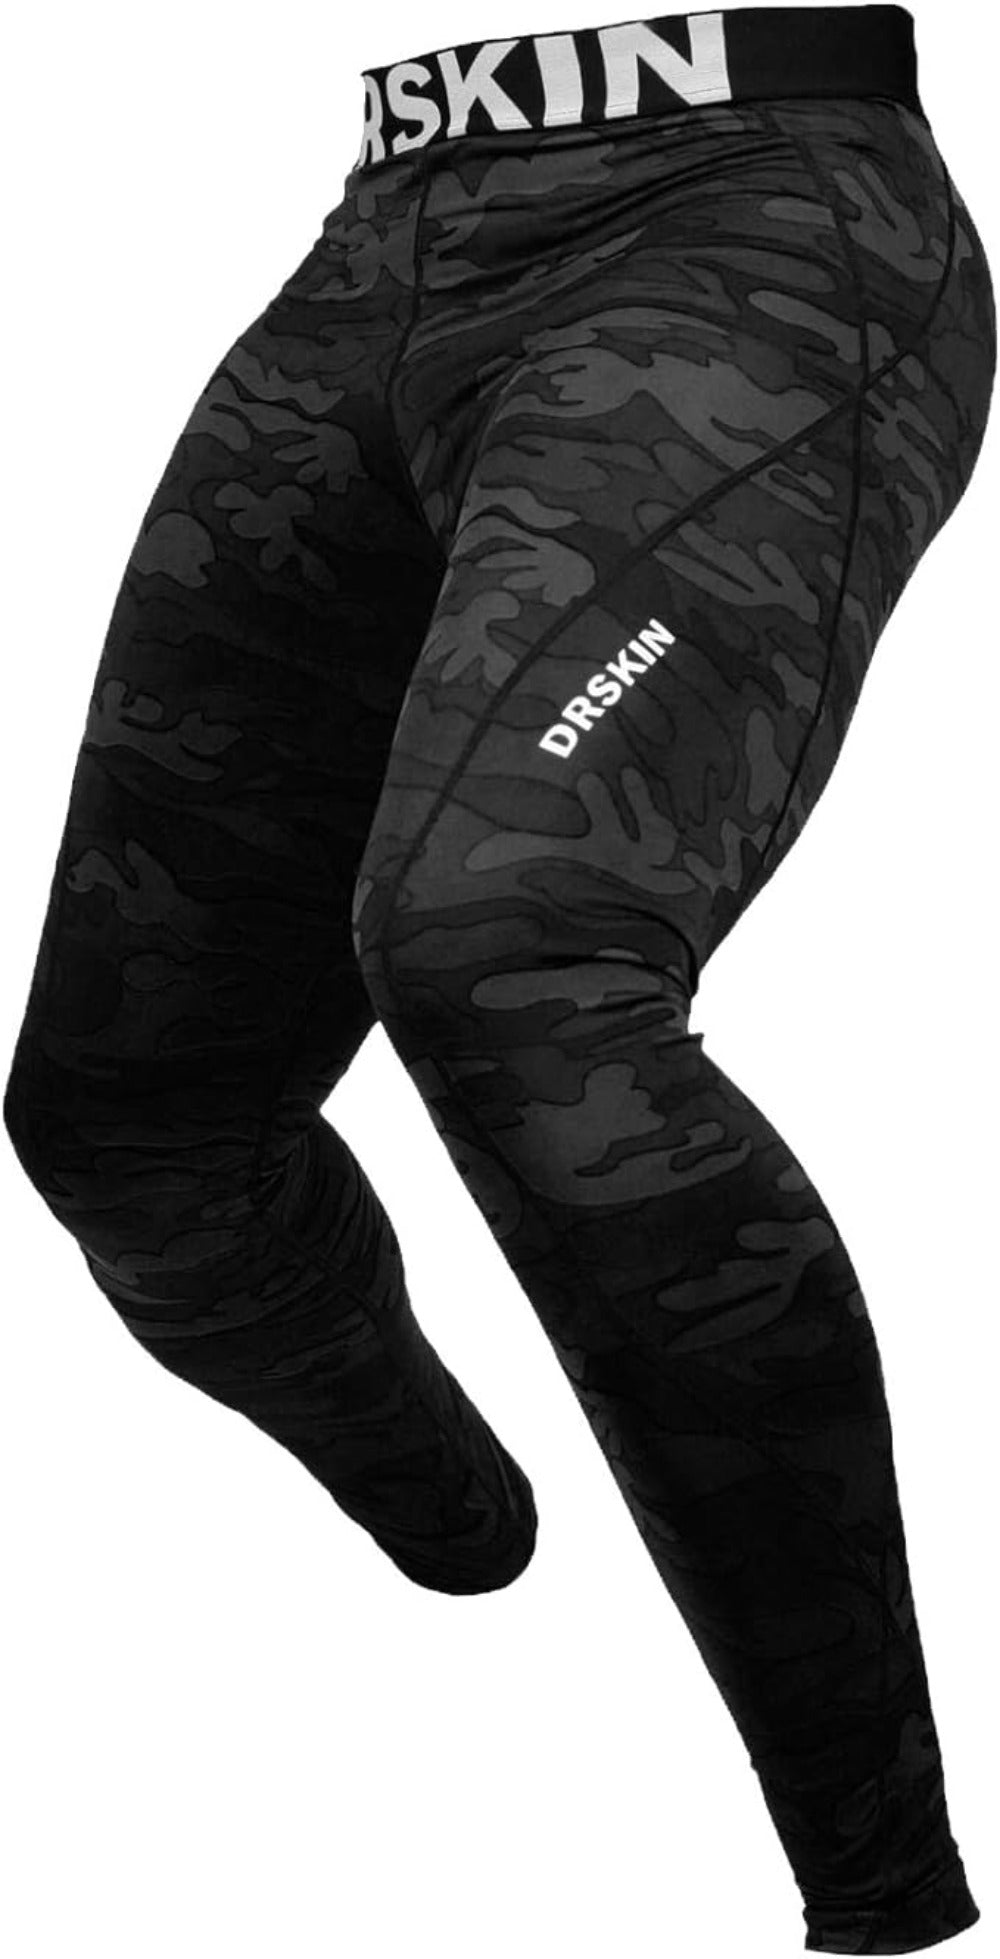 Powergear Dry Fit Compression Pants CamoBlack 1P - DRSKINSPORTS